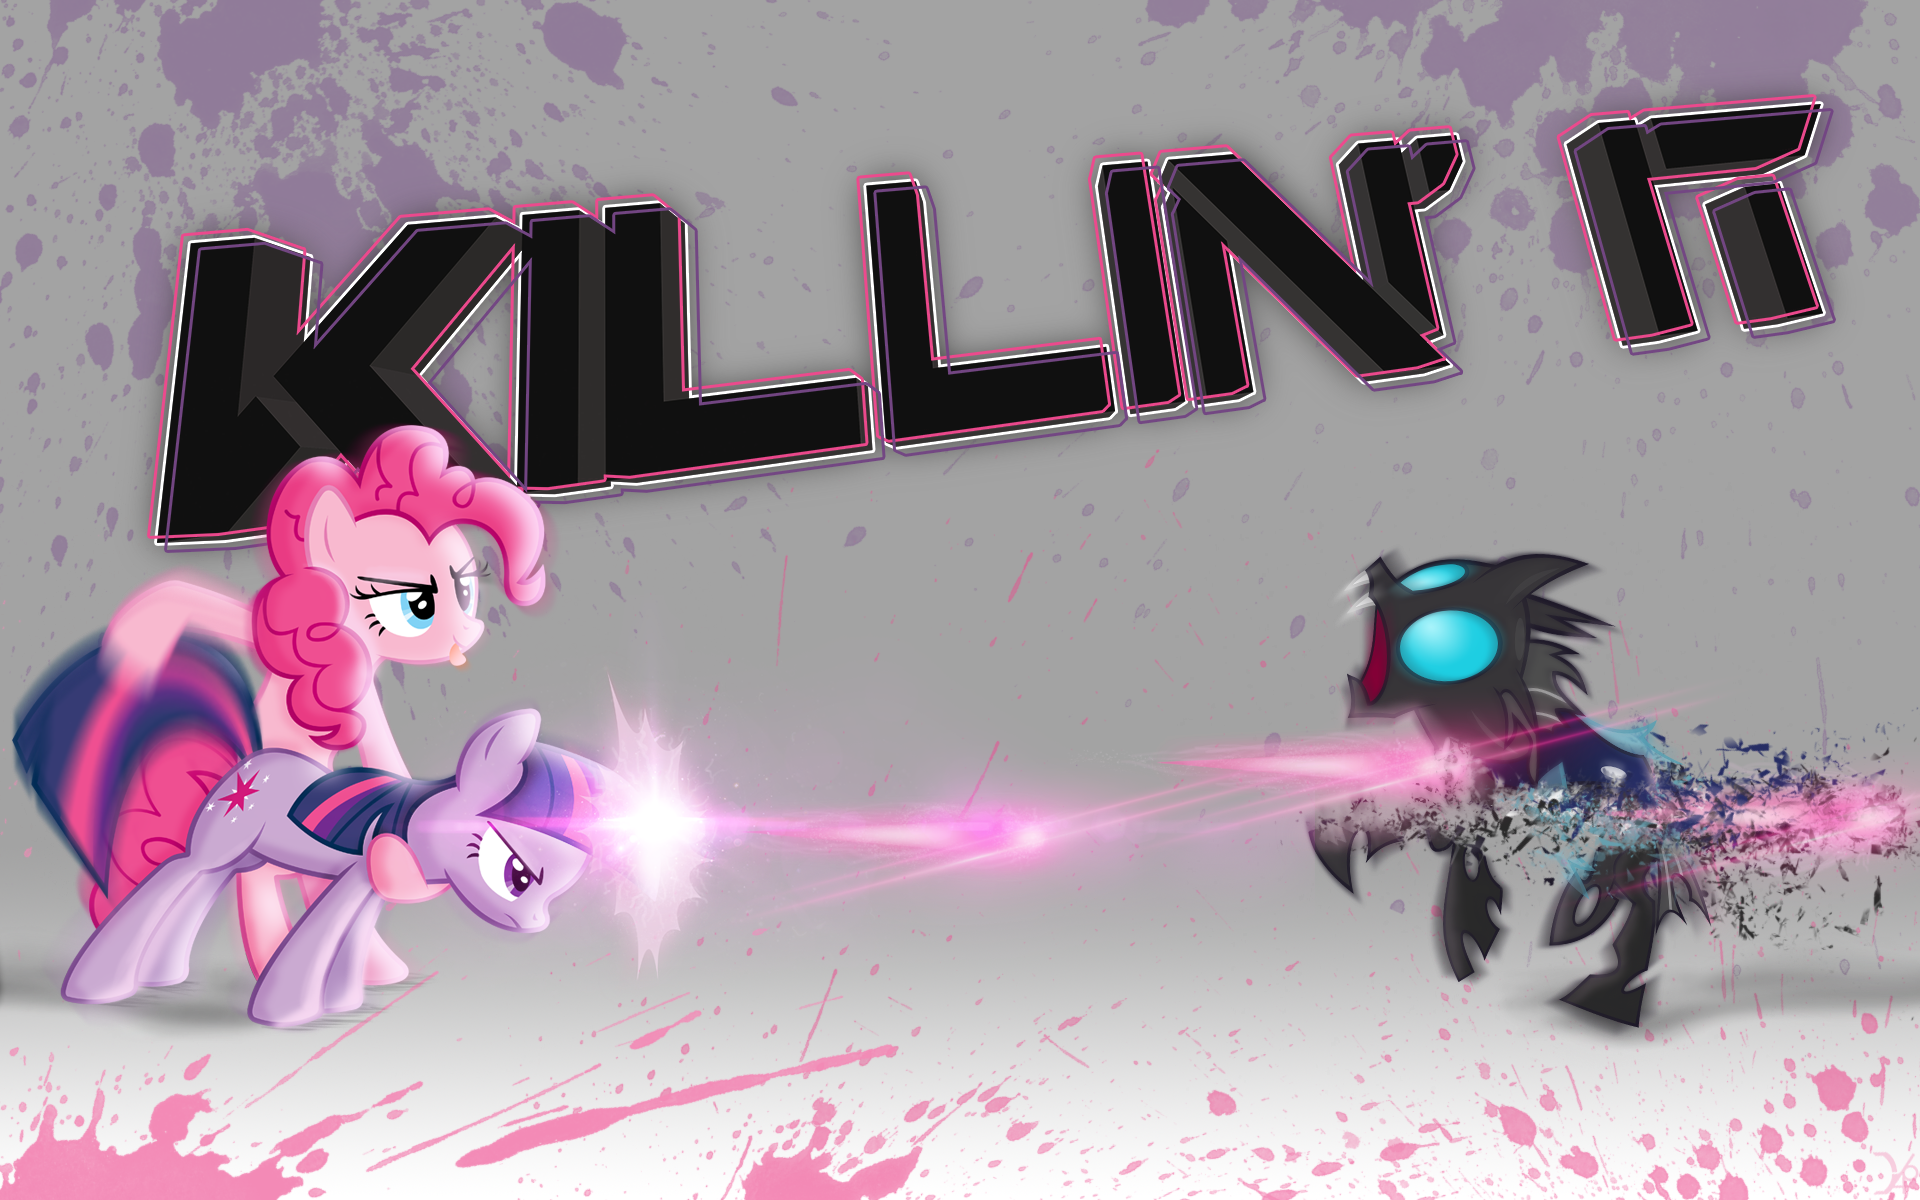 KILLIN' IT by anbolanos91 and dadio46